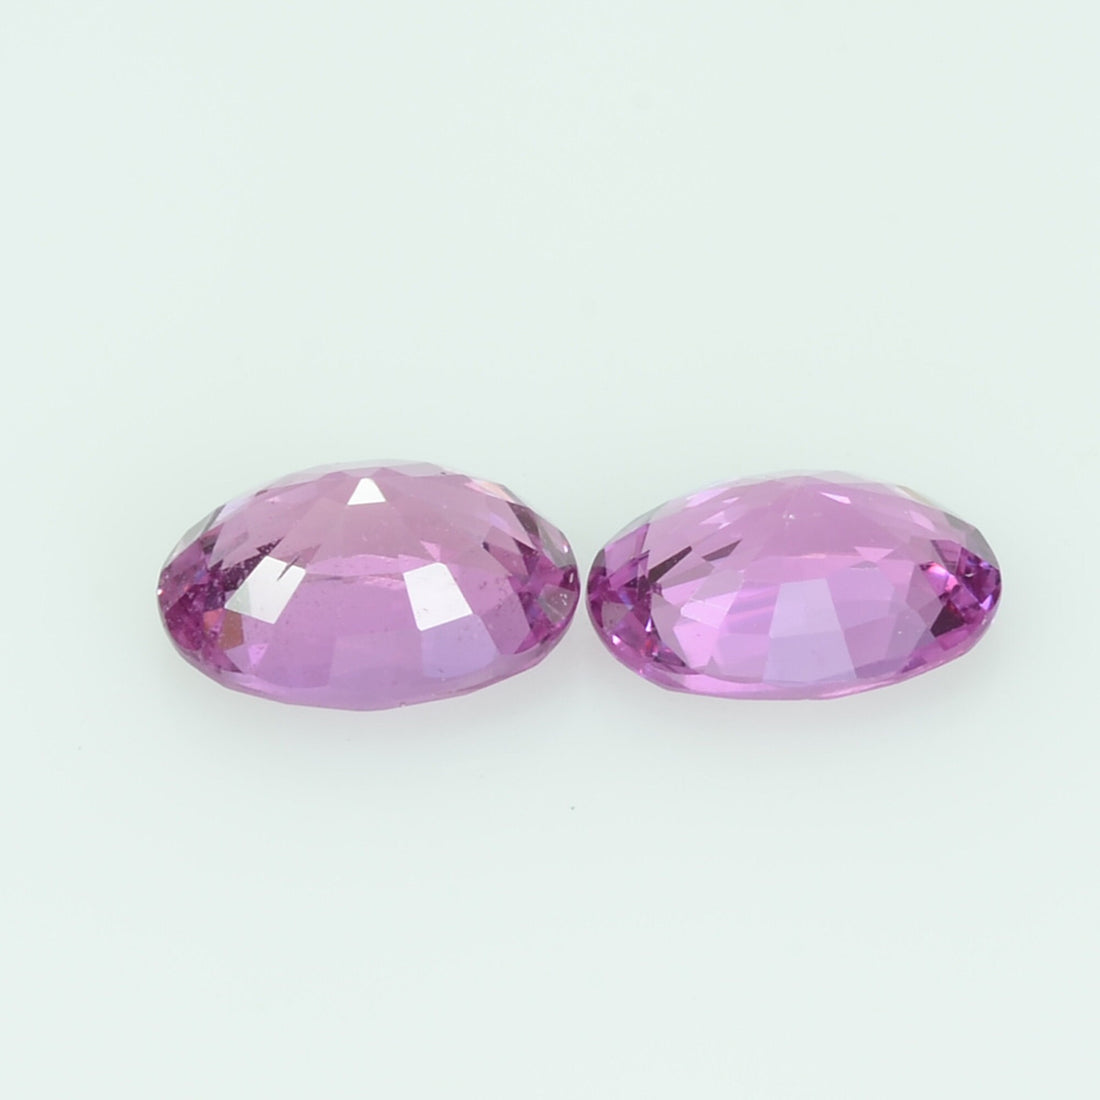 2.06 cts Natural Pink Sapphire Loose Gemstone oval Cut